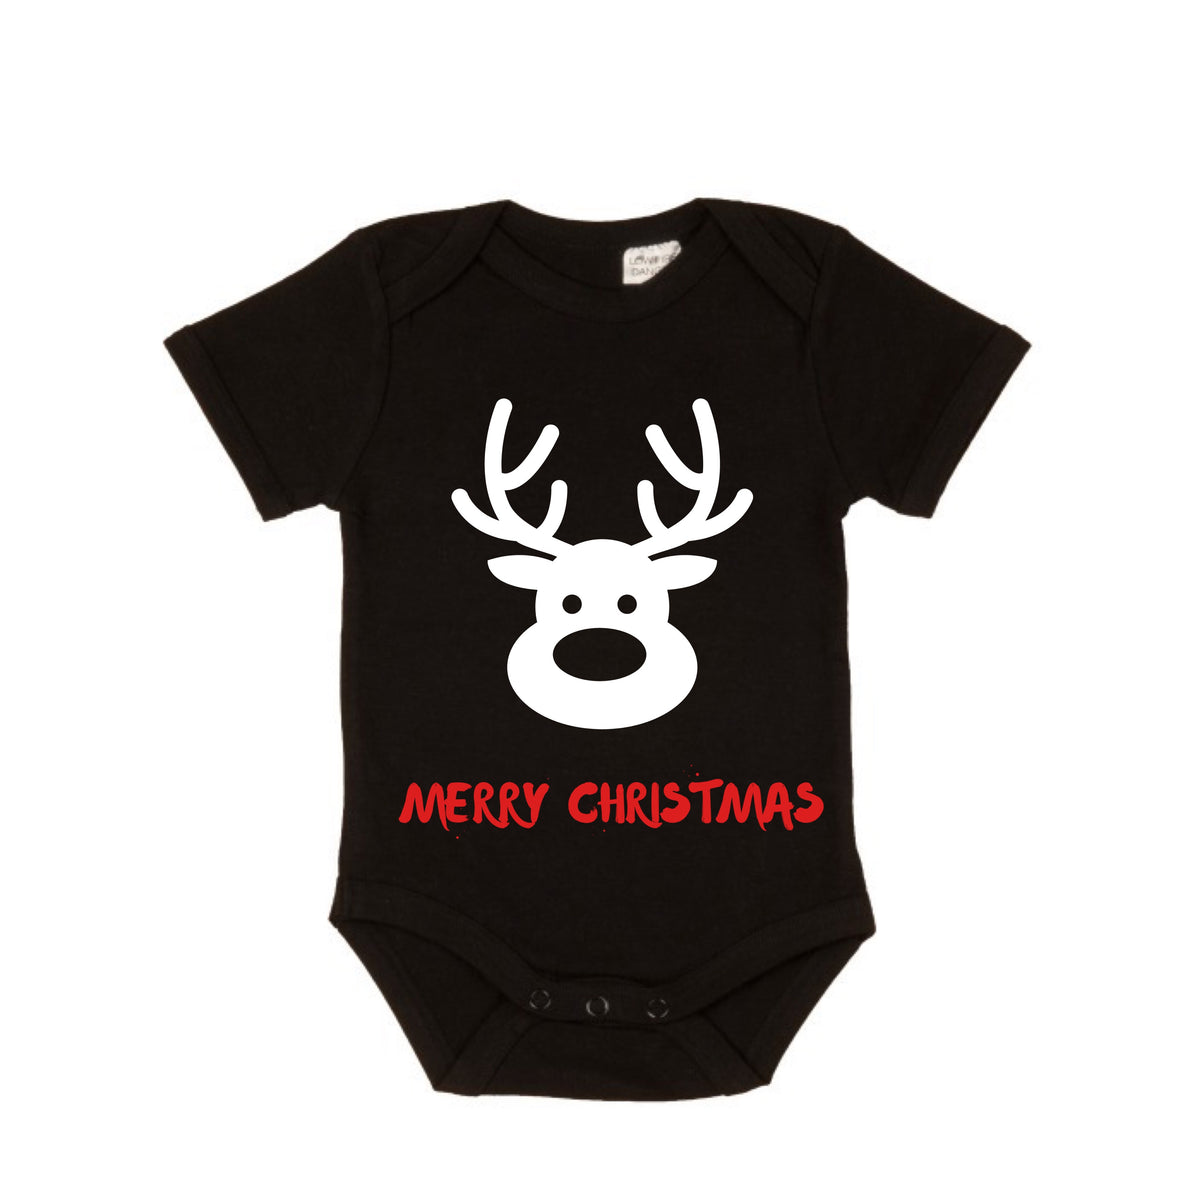 MLW by Design - Merry Christmas Bodysuit